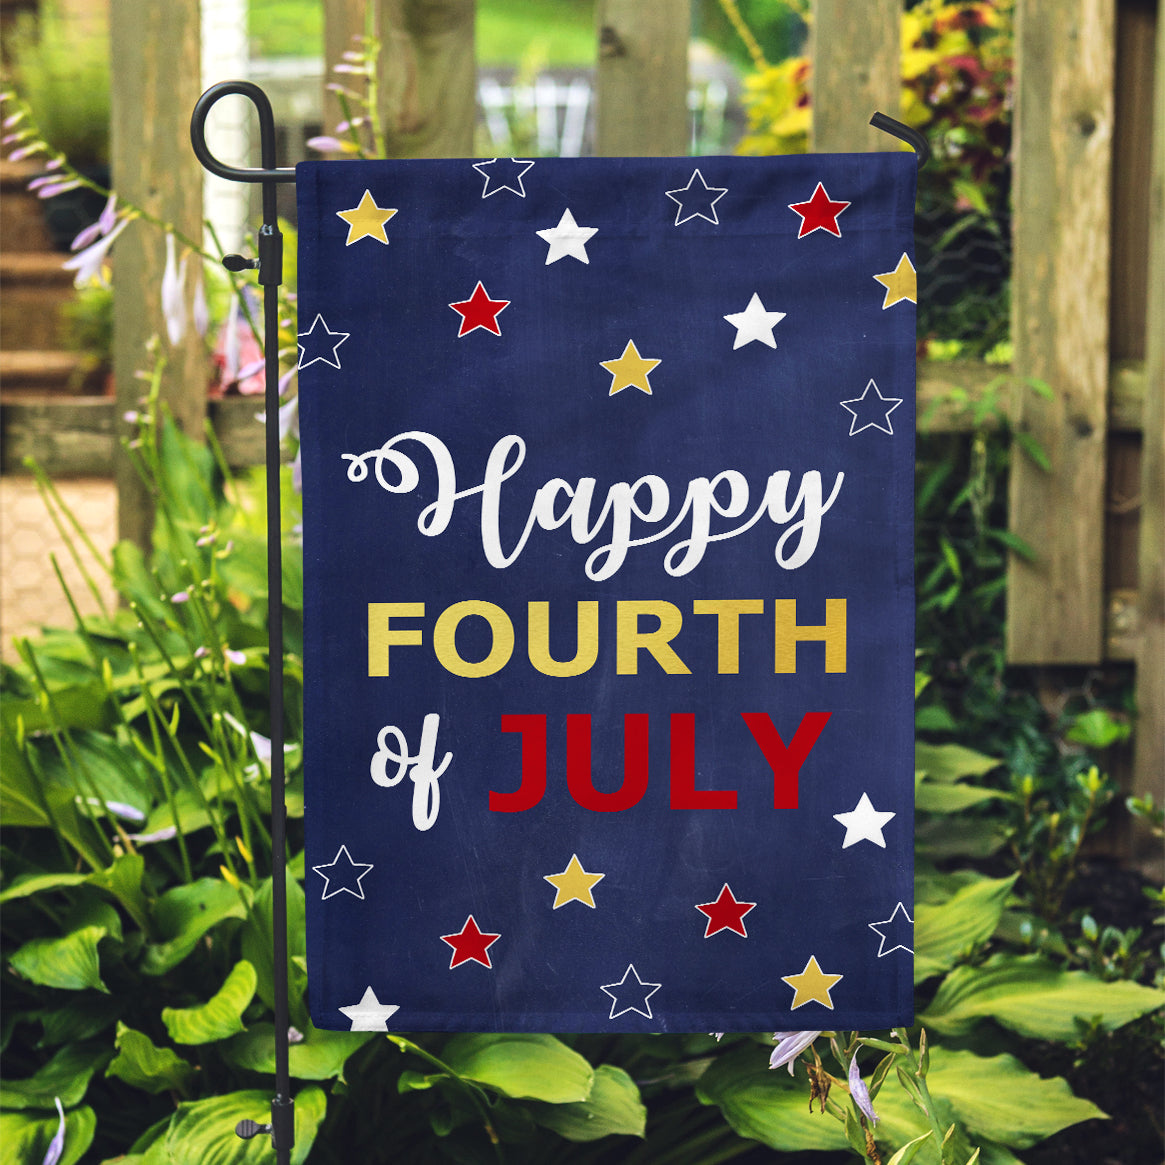 GOLD FOIL Happy Fourth Garden Flag  12" x 18" - Second East